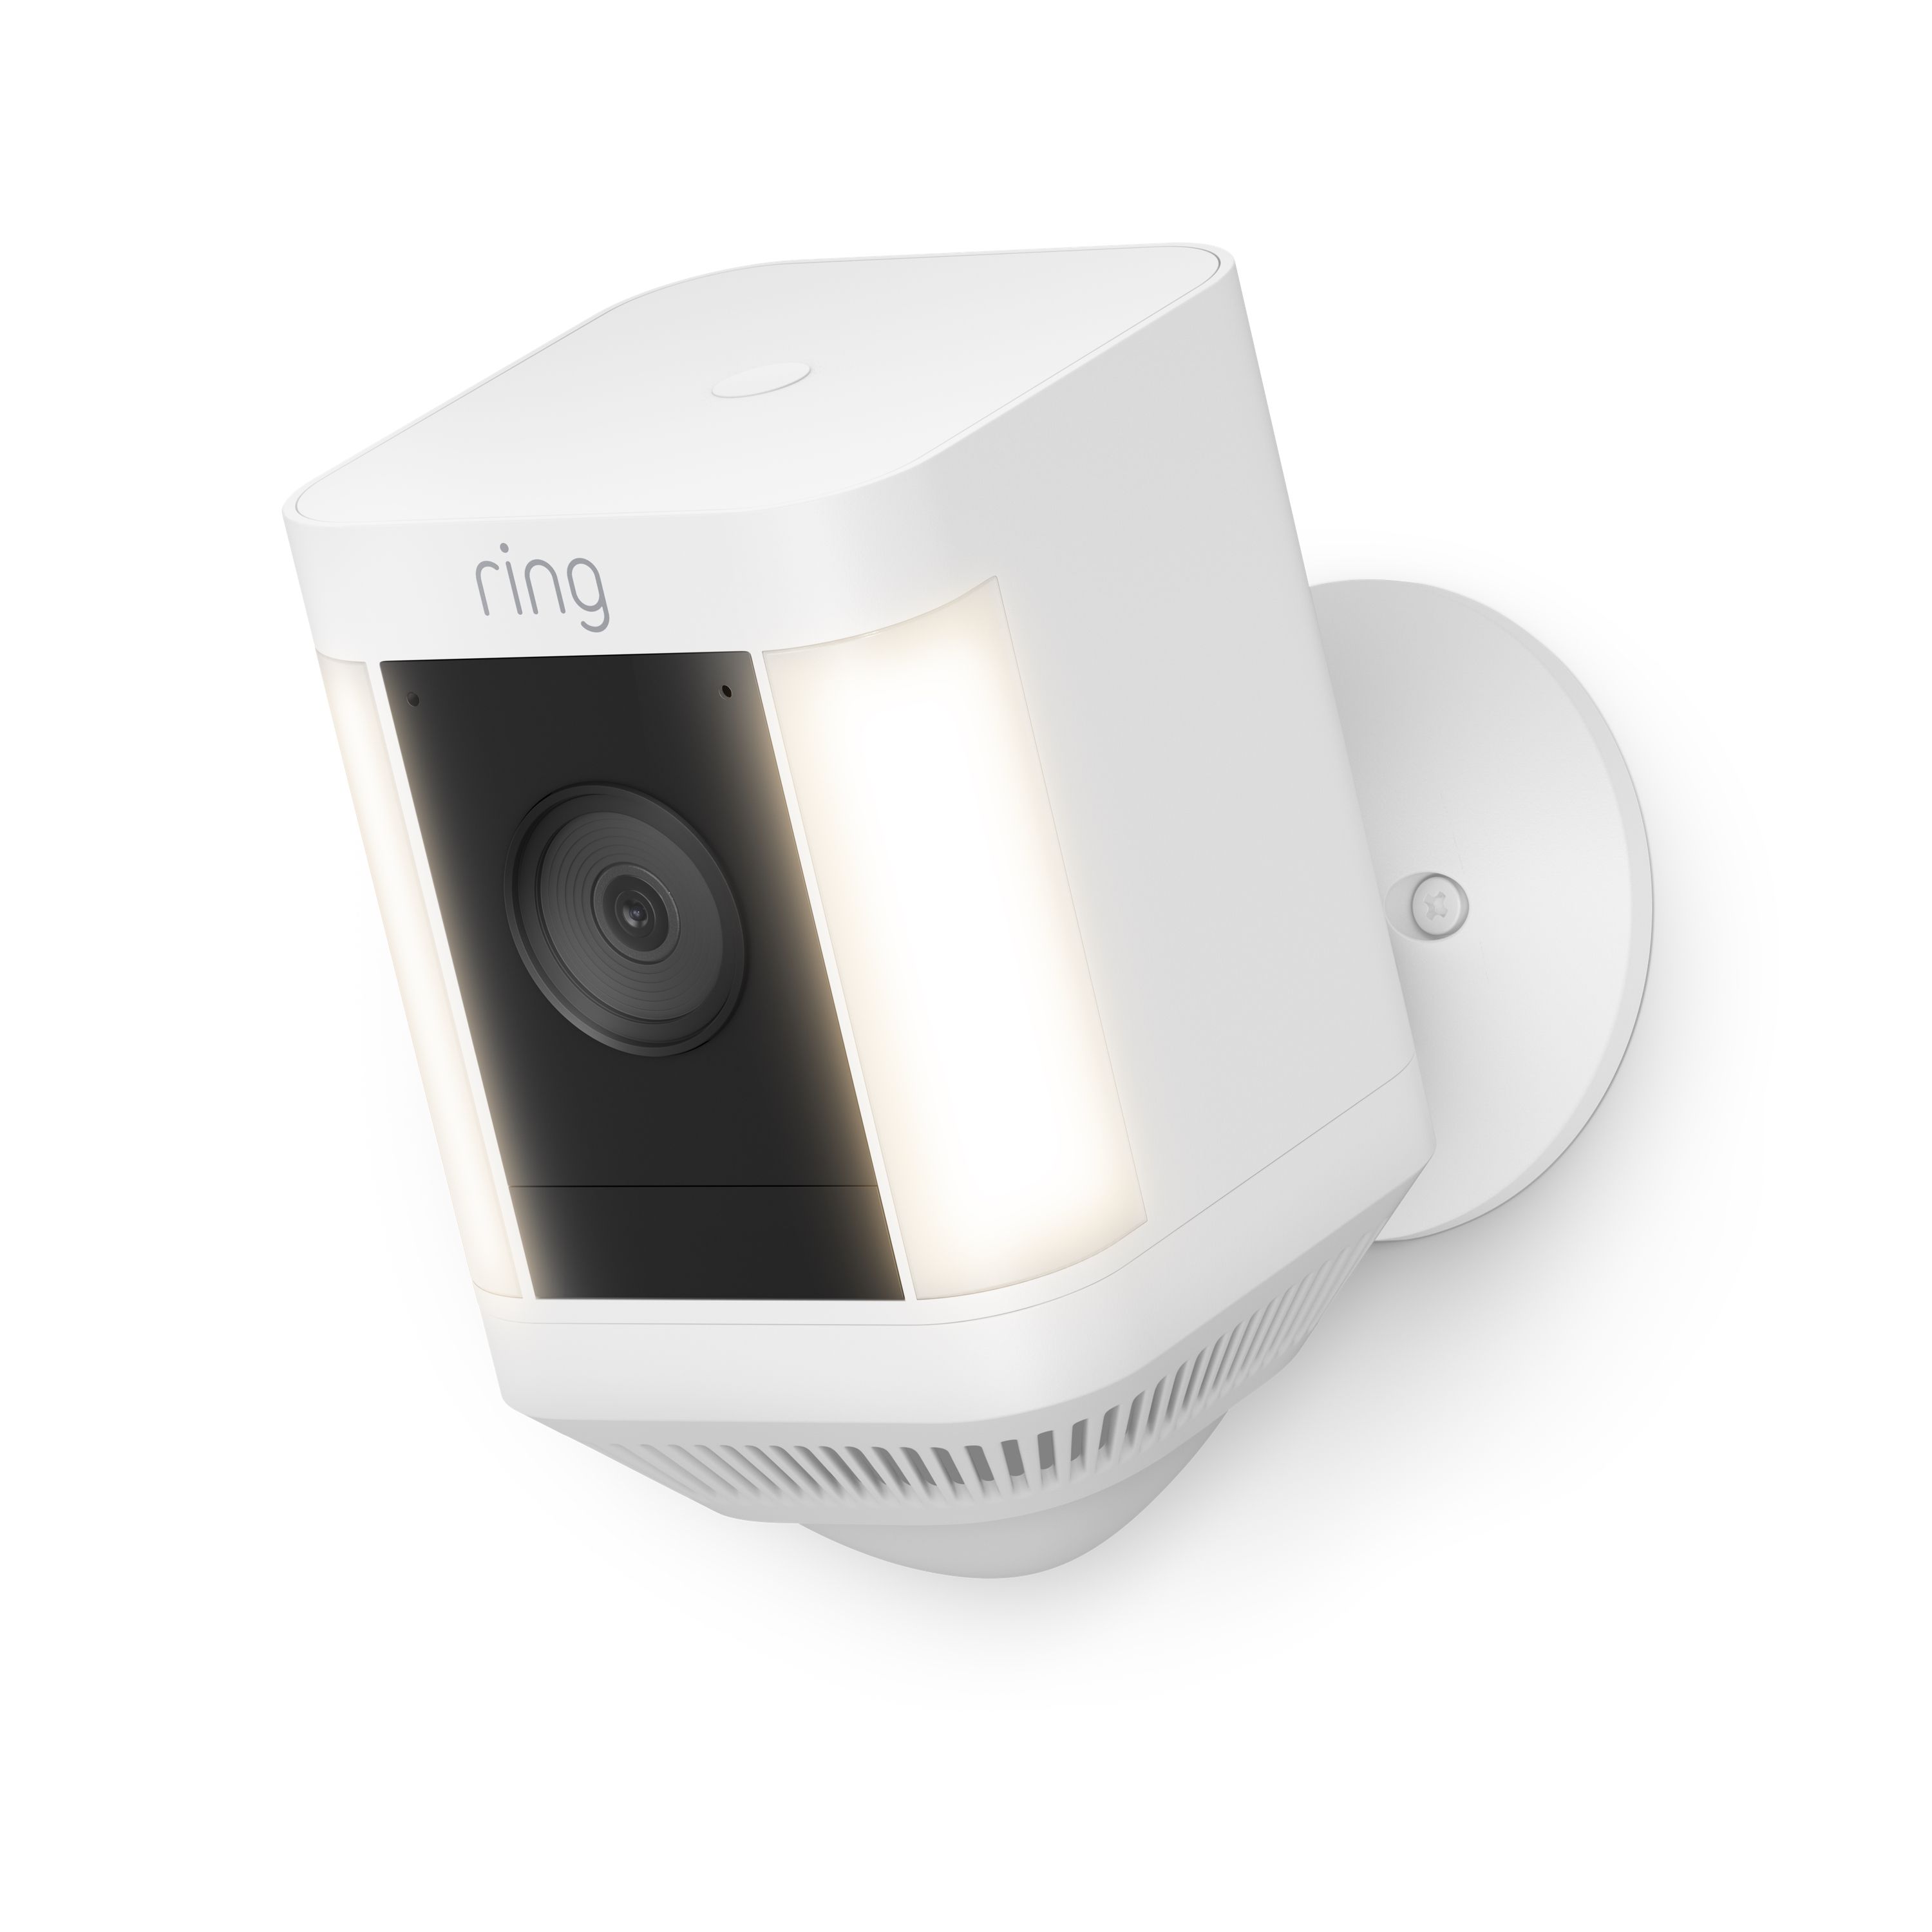 Ring Spotlight Cam Plus, Battery | Two-Way Talk, Color Night Vision, and Security Siren (2022 rel... | Amazon (US)